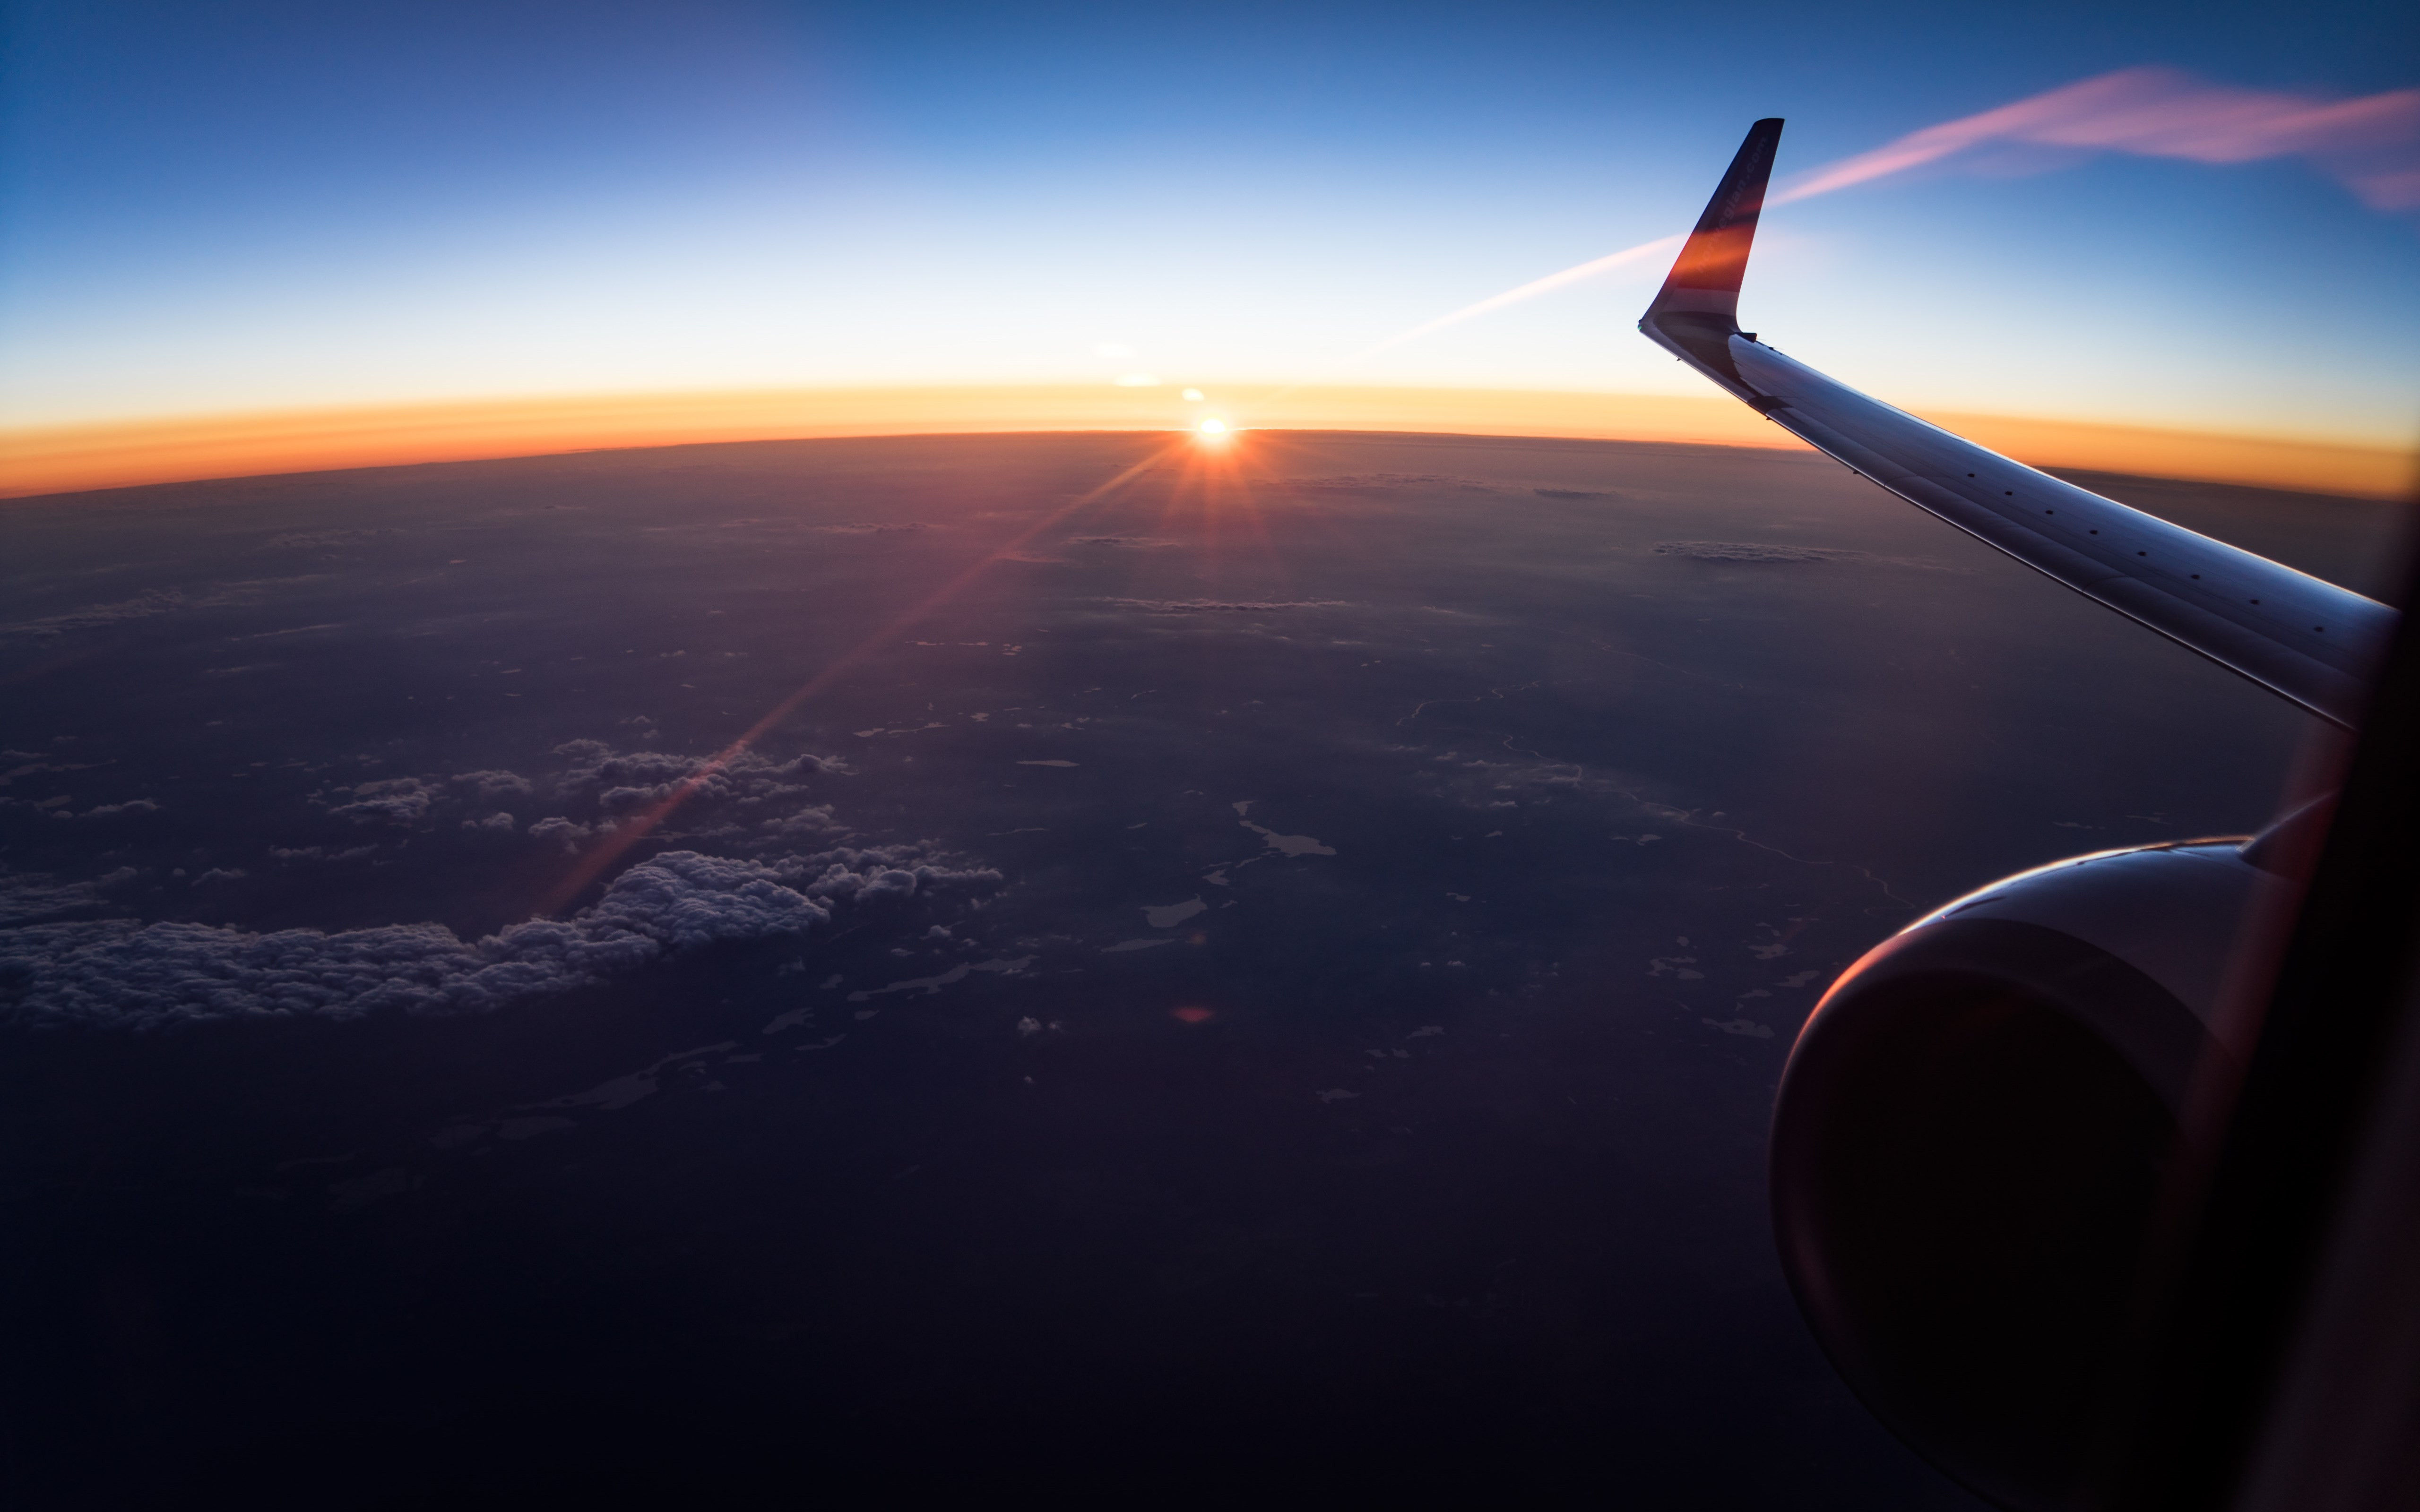 In the plane watching the sunset wallpaper 5120x3200